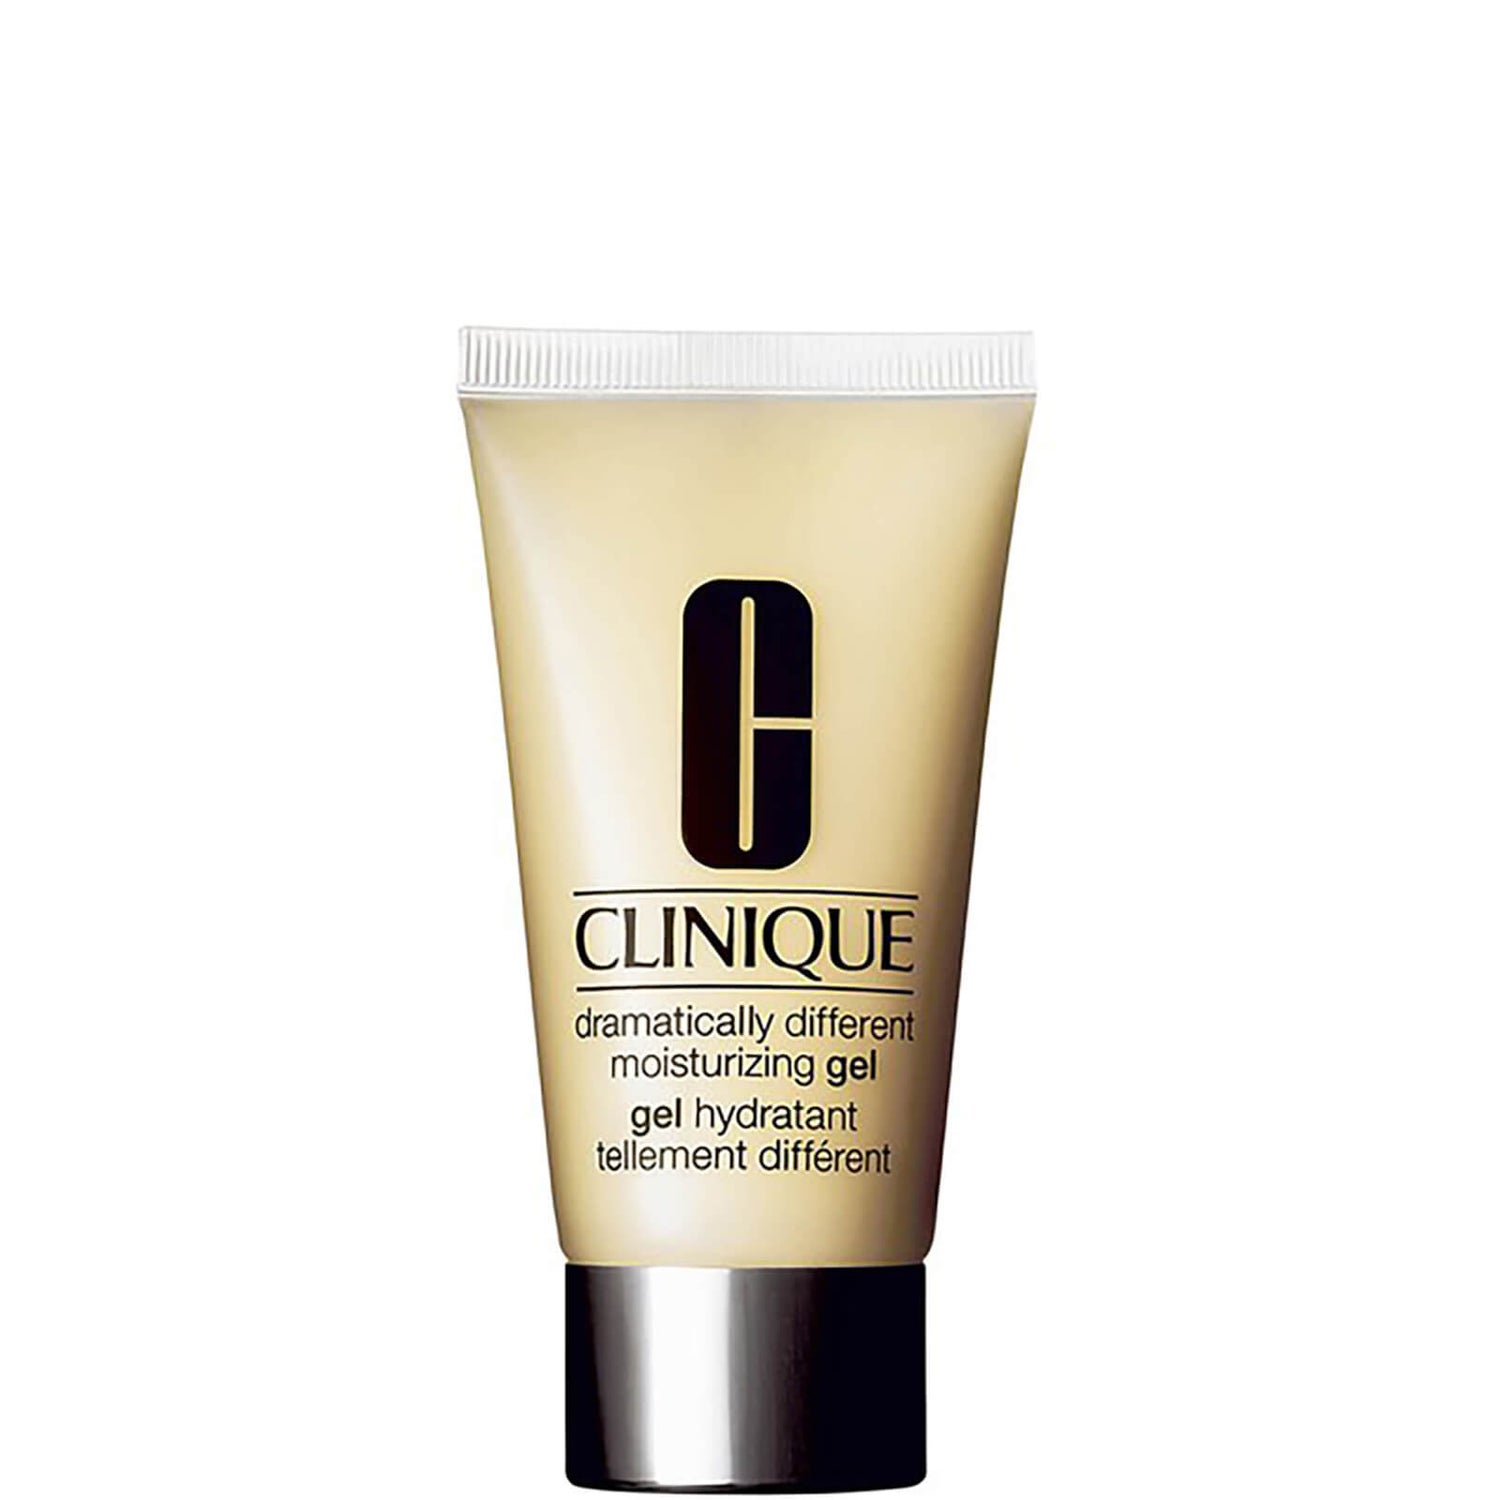 Clinique Dramatically Different Moisturizing Gel 50 ml in Tube